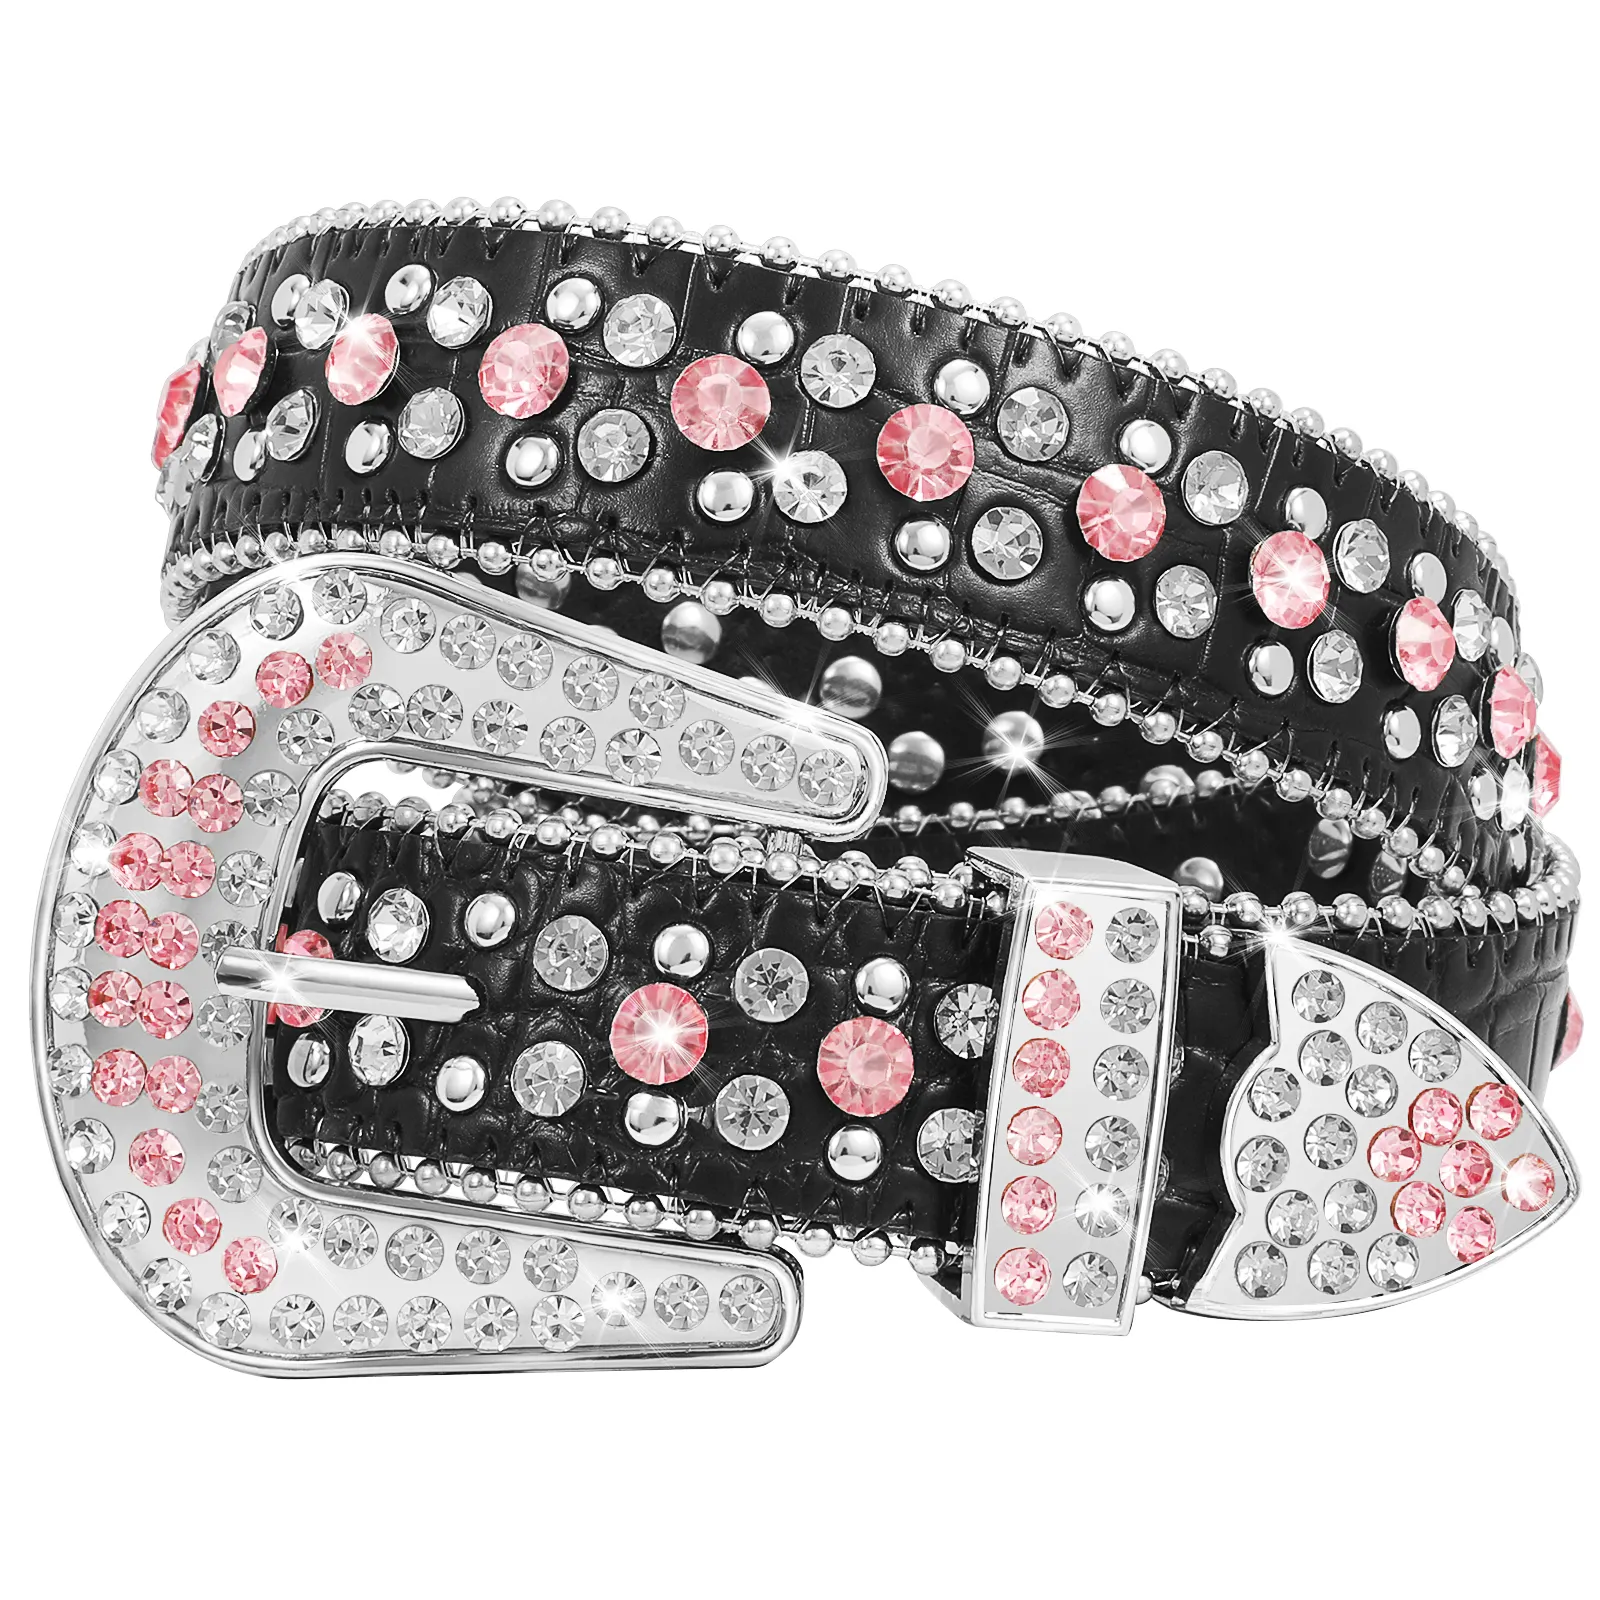 New Arrivals Ins Hot Youth Teenager Fashion Bling Country Cowboy Rhinestone Crystal Diamond Buckle Belt